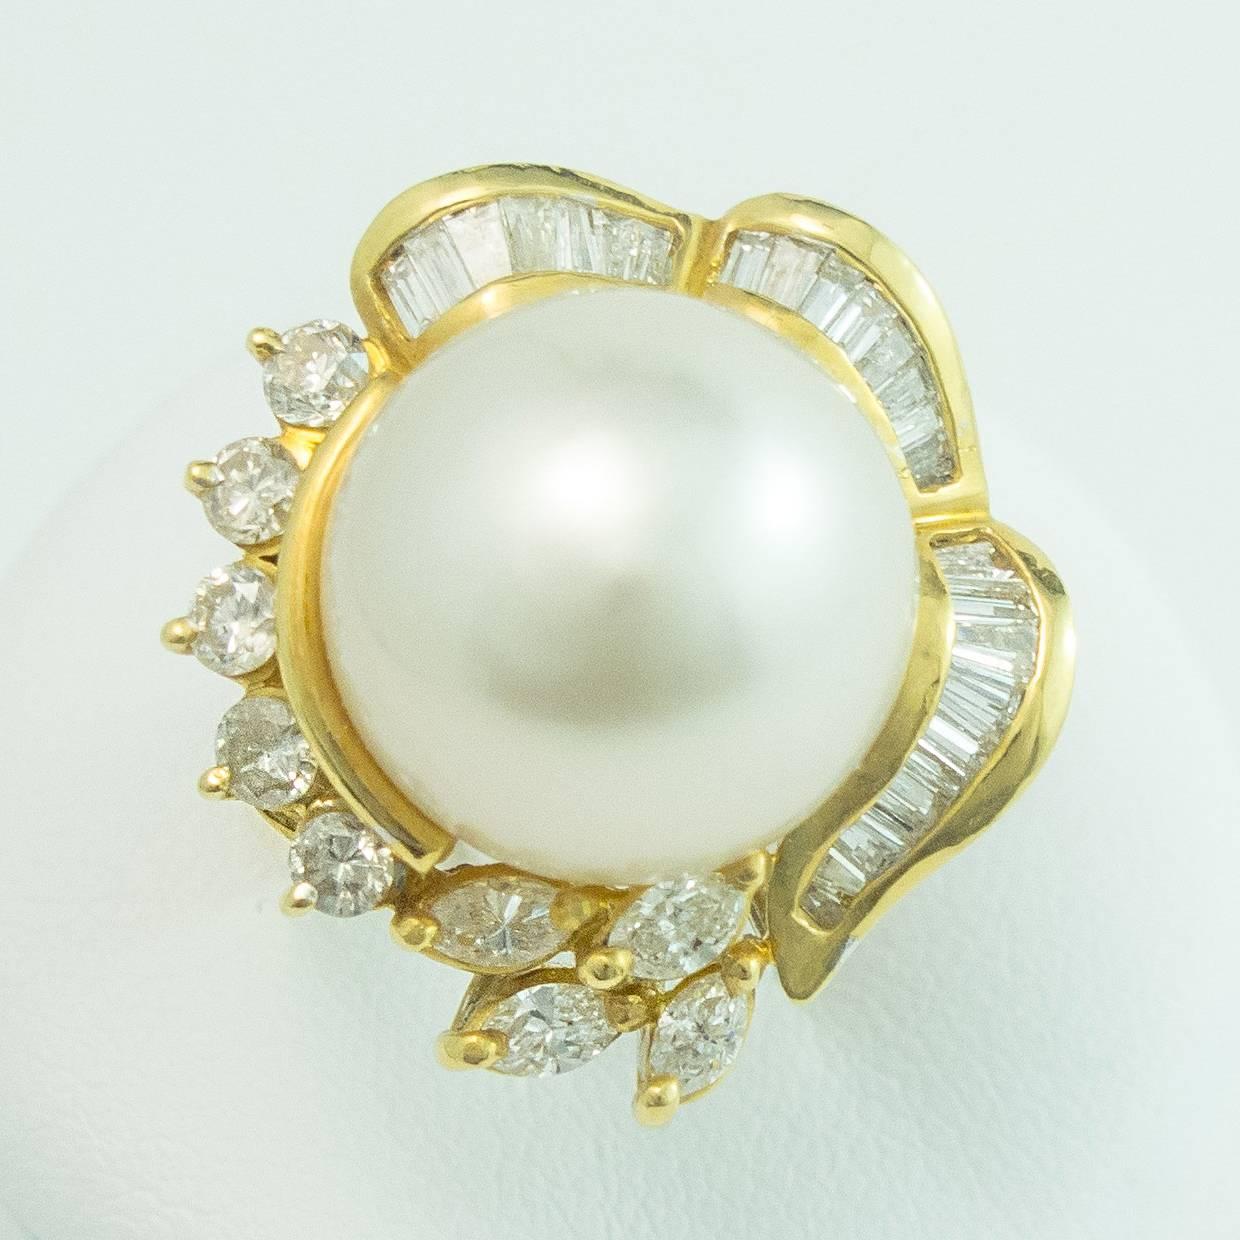 A gorgeous South Sea White Pearl and Diamond 18 Karat Yellow Gold Ring. This fine 14mm South Sea Pearl is round, white with aubergine and cream undertones and center set in a stunning hand crafted 18K yellow gold mount. 

The Pearl is surrounded